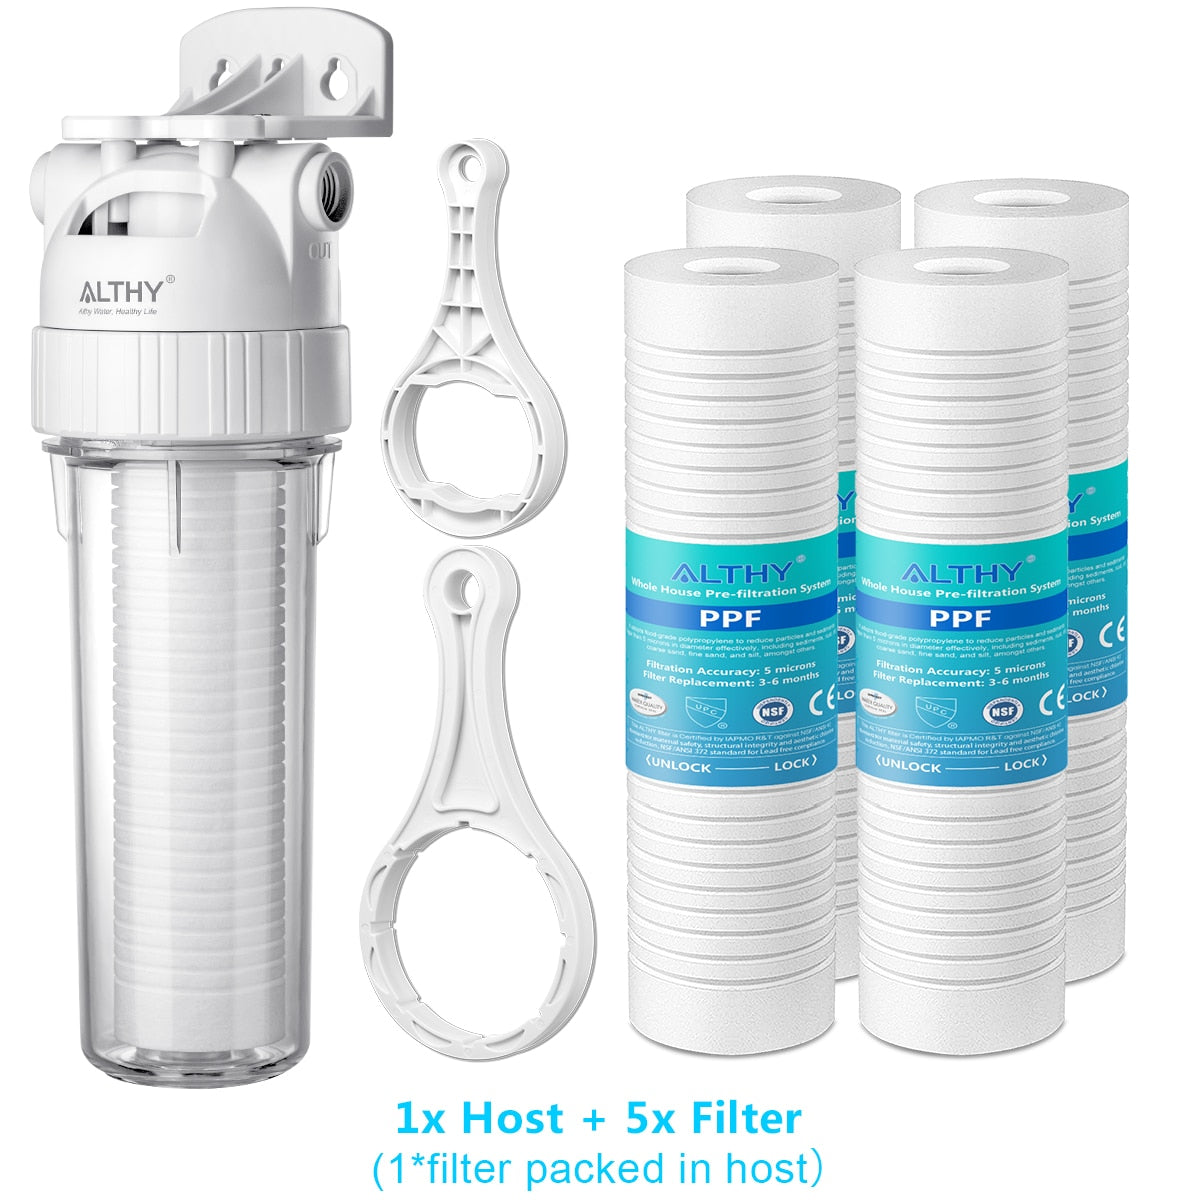 ALTHY 5 Micron Whole House Sediment Water Filter System Prefilter Purifier, 10 Inch PPFcotton Pre filter Hostand5xFilterChina Hardware > Plumbing > Water Dispensing & Filtration 212.99 EZYSELLA SHOP